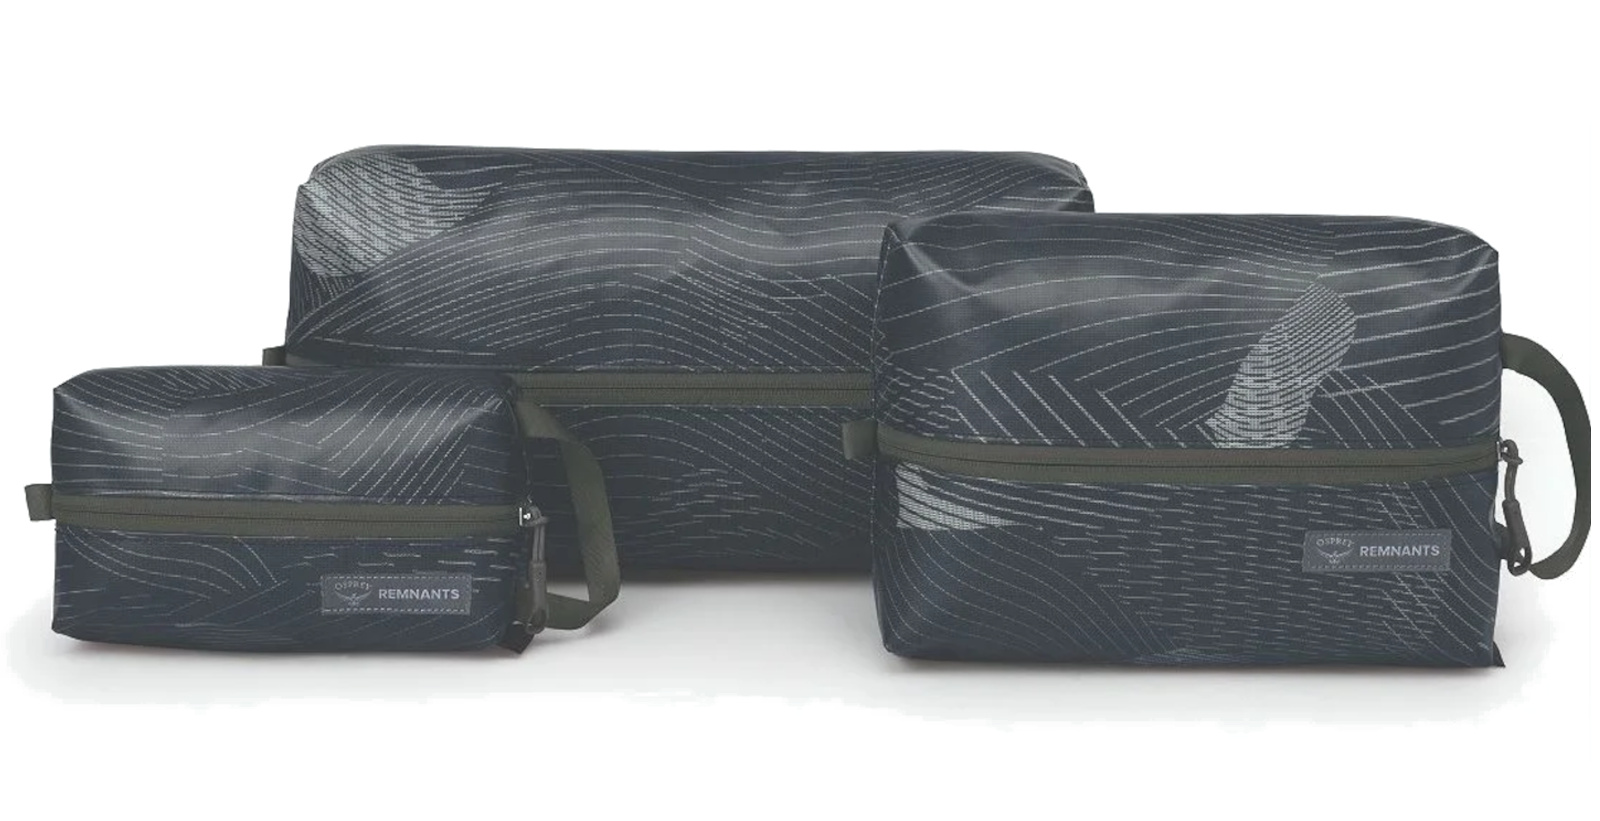 <p>Keep your toiletries organized with three sizes of sacks with zippered openings and a D-ring for hanging them up. Another Remnants option, this set is made from the leftovers of the Transporter pack production process. They’re weather-resistant, and are a more sustainable option than kits made form-fresh materials.</p> <a class="buy-now single" href="https://osprey.pxf.io/c/381569/1765694/20745?subId1=gjsposprey4thq224&u=https%3A%2F%2Fwww.osprey.com%2Fosprey-remnants-weather-resistant-zipper-sack-set%3Fcolor%3DCamo%252520Lines%252520Print">Shop Now</a> <a class="buy-now single" href="https://osprey.pxf.io/c/381569/1765694/20745?subId1=gjsposprey4thq224&u=https%3A%2F%2Fwww.osprey.com%2Ffeatured%2Fsale">Shop the Osprey July 4th Sale</a>  <p><em>This post is sponsored by Osprey. Check out the <a href="https://osprey.pxf.io/c/381569/1765694/20745?subId1=gjsposprey4thq224&u=https%3A%2F%2Fwww.osprey.com%2Ffeatured%2Fsale" rel="noreferrer noopener"><strong>Osprey Fourth of July Sale</strong></a> online.</em></p> <p>The post <a rel="nofollow" href="https://gearjunkie.com/packs/save-osprey-packs-luggage-july-fourth-sale">Save 25% on Osprey Packs & Luggage Through July 8</a> appeared first on <a rel="nofollow" href="https://gearjunkie.com">GearJunkie</a>.</p>